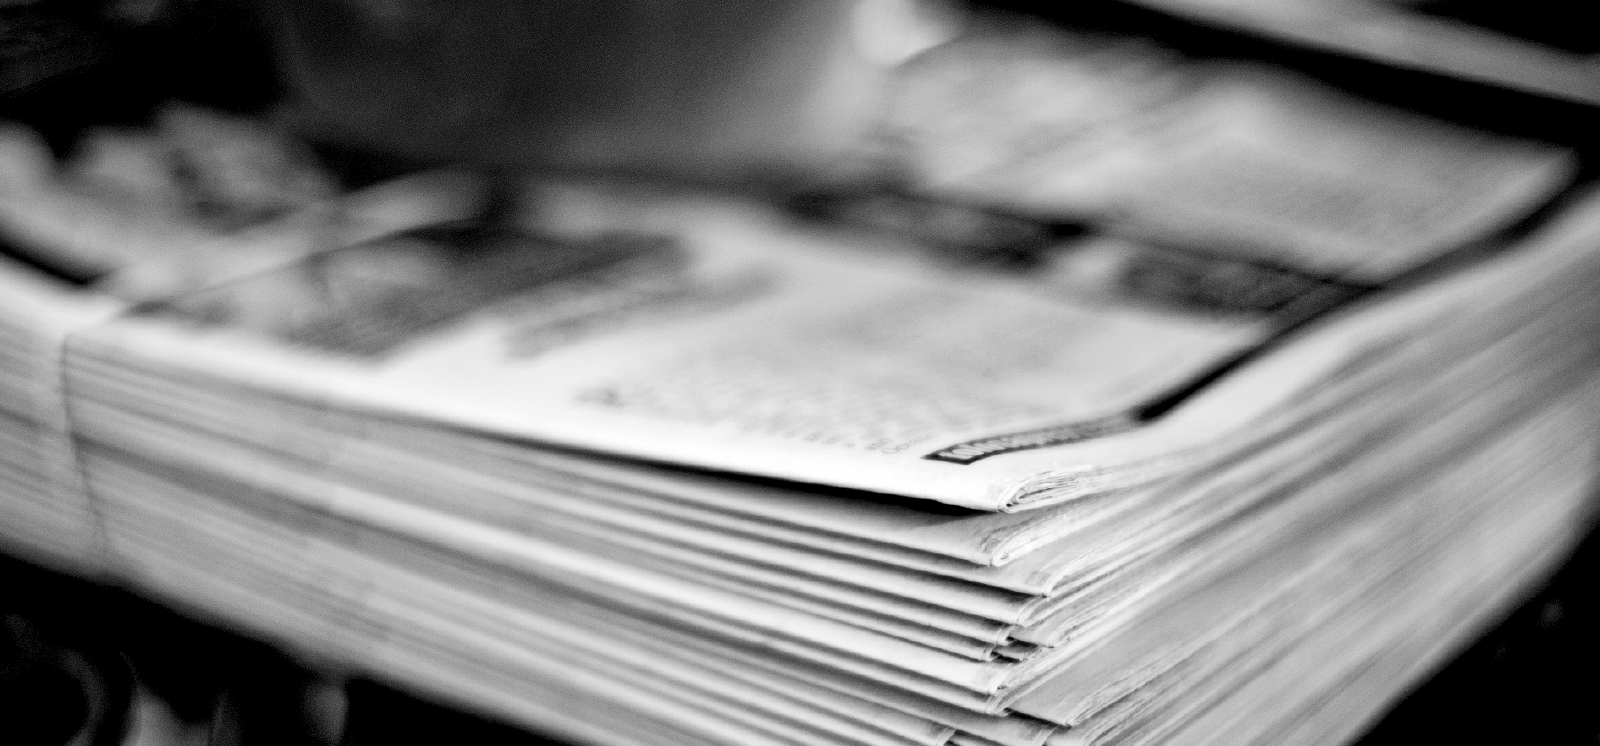 newspaper stack on table